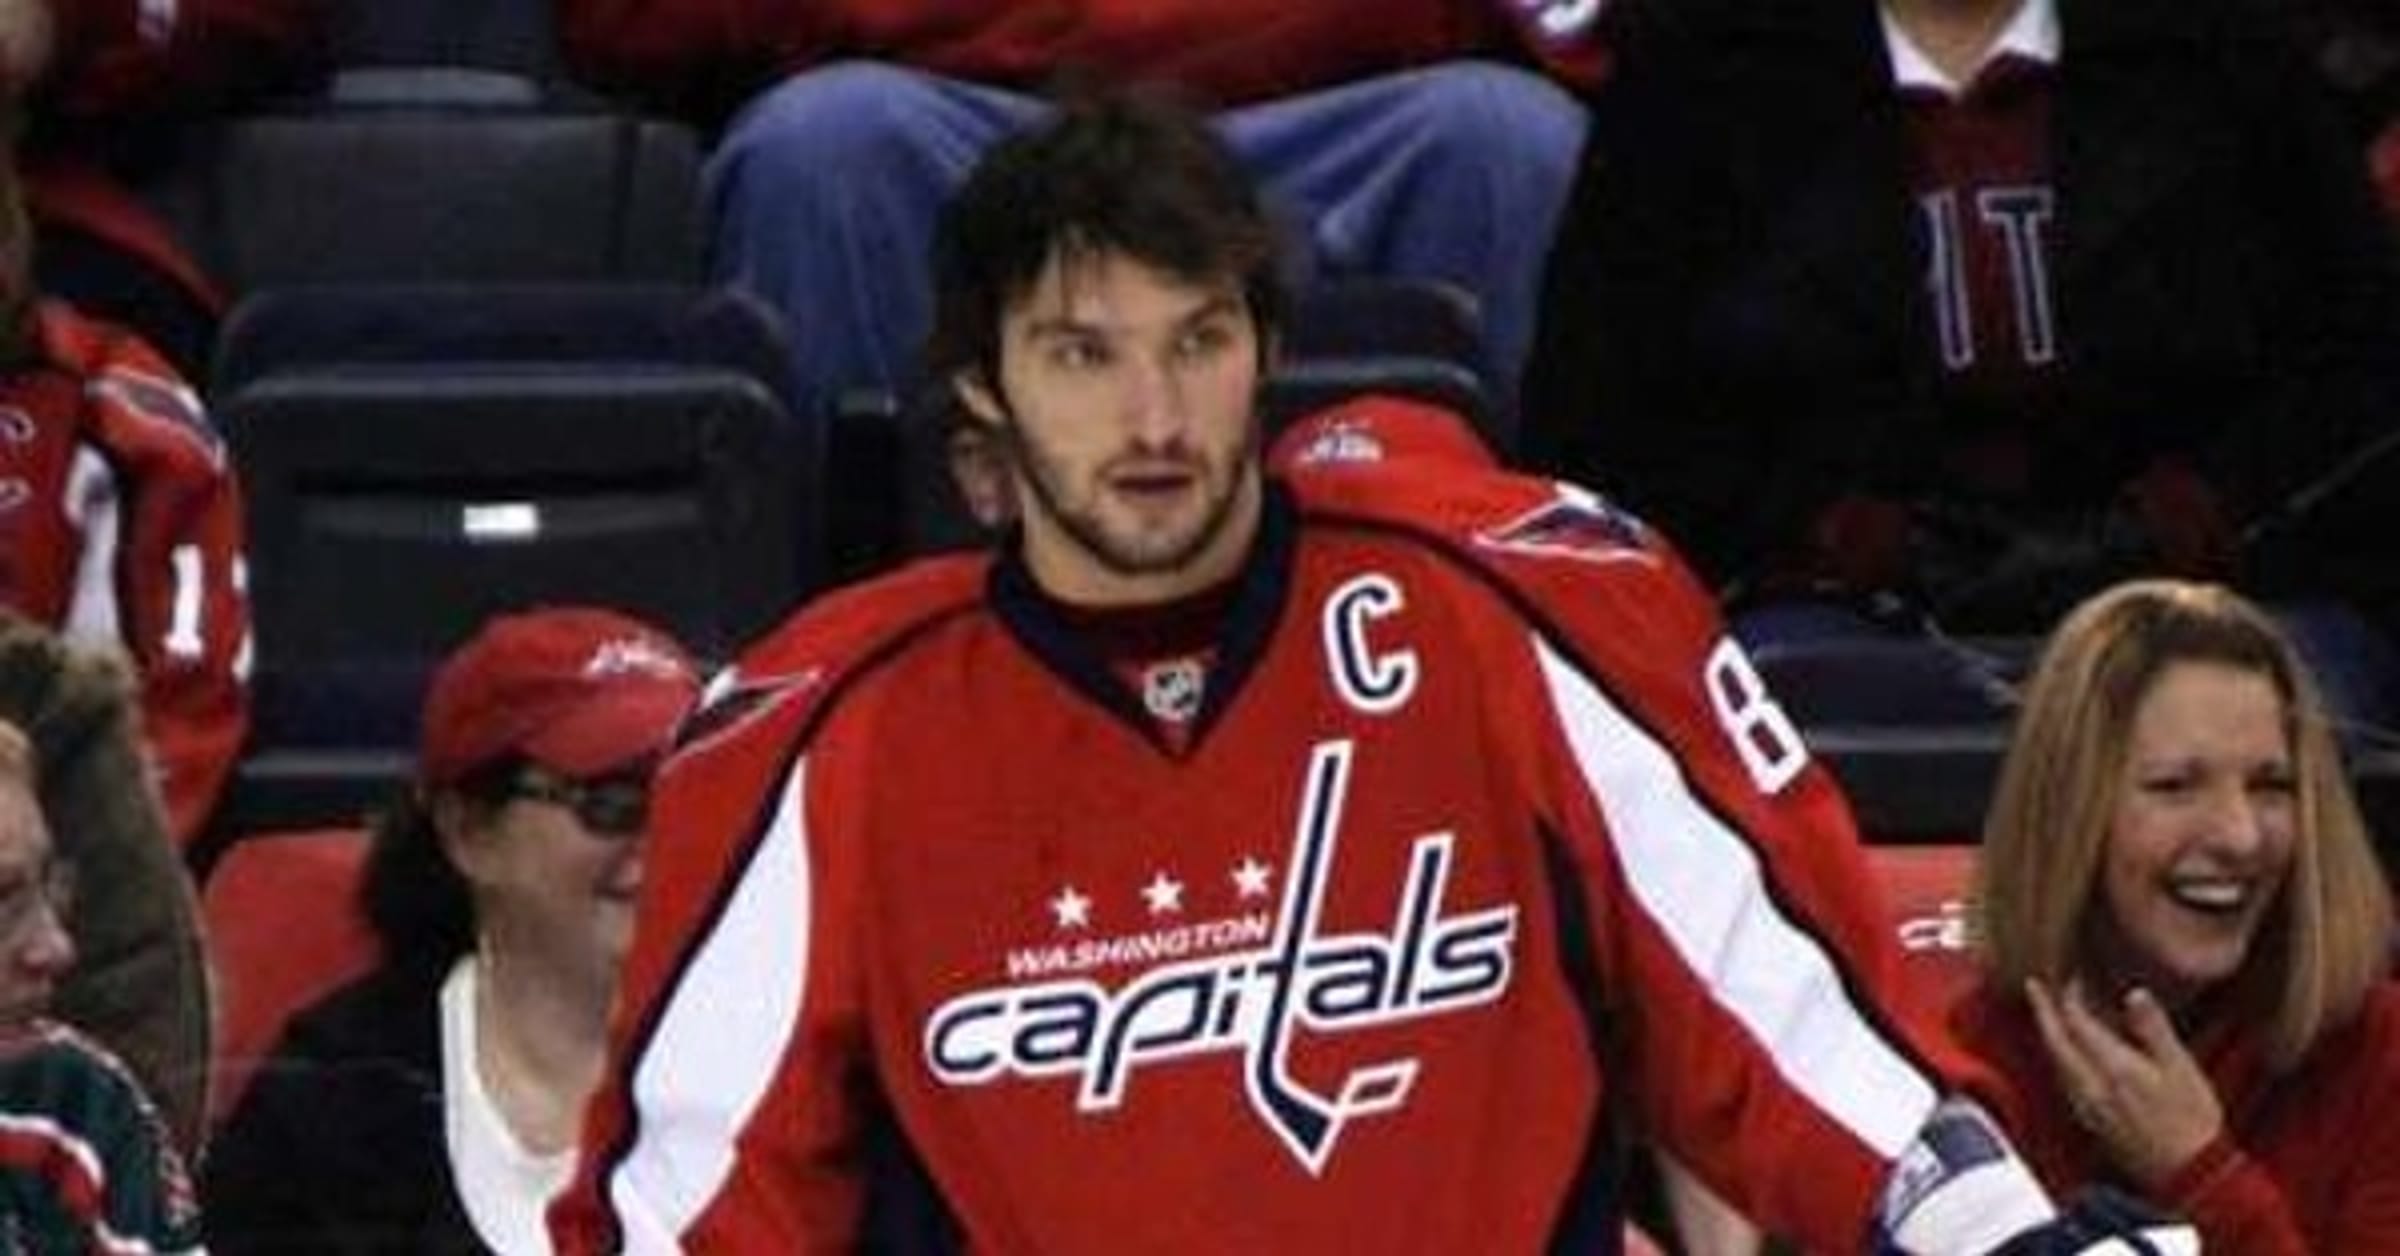 Reader's Poll: Which is the Best Capitals Uniform of All-Time